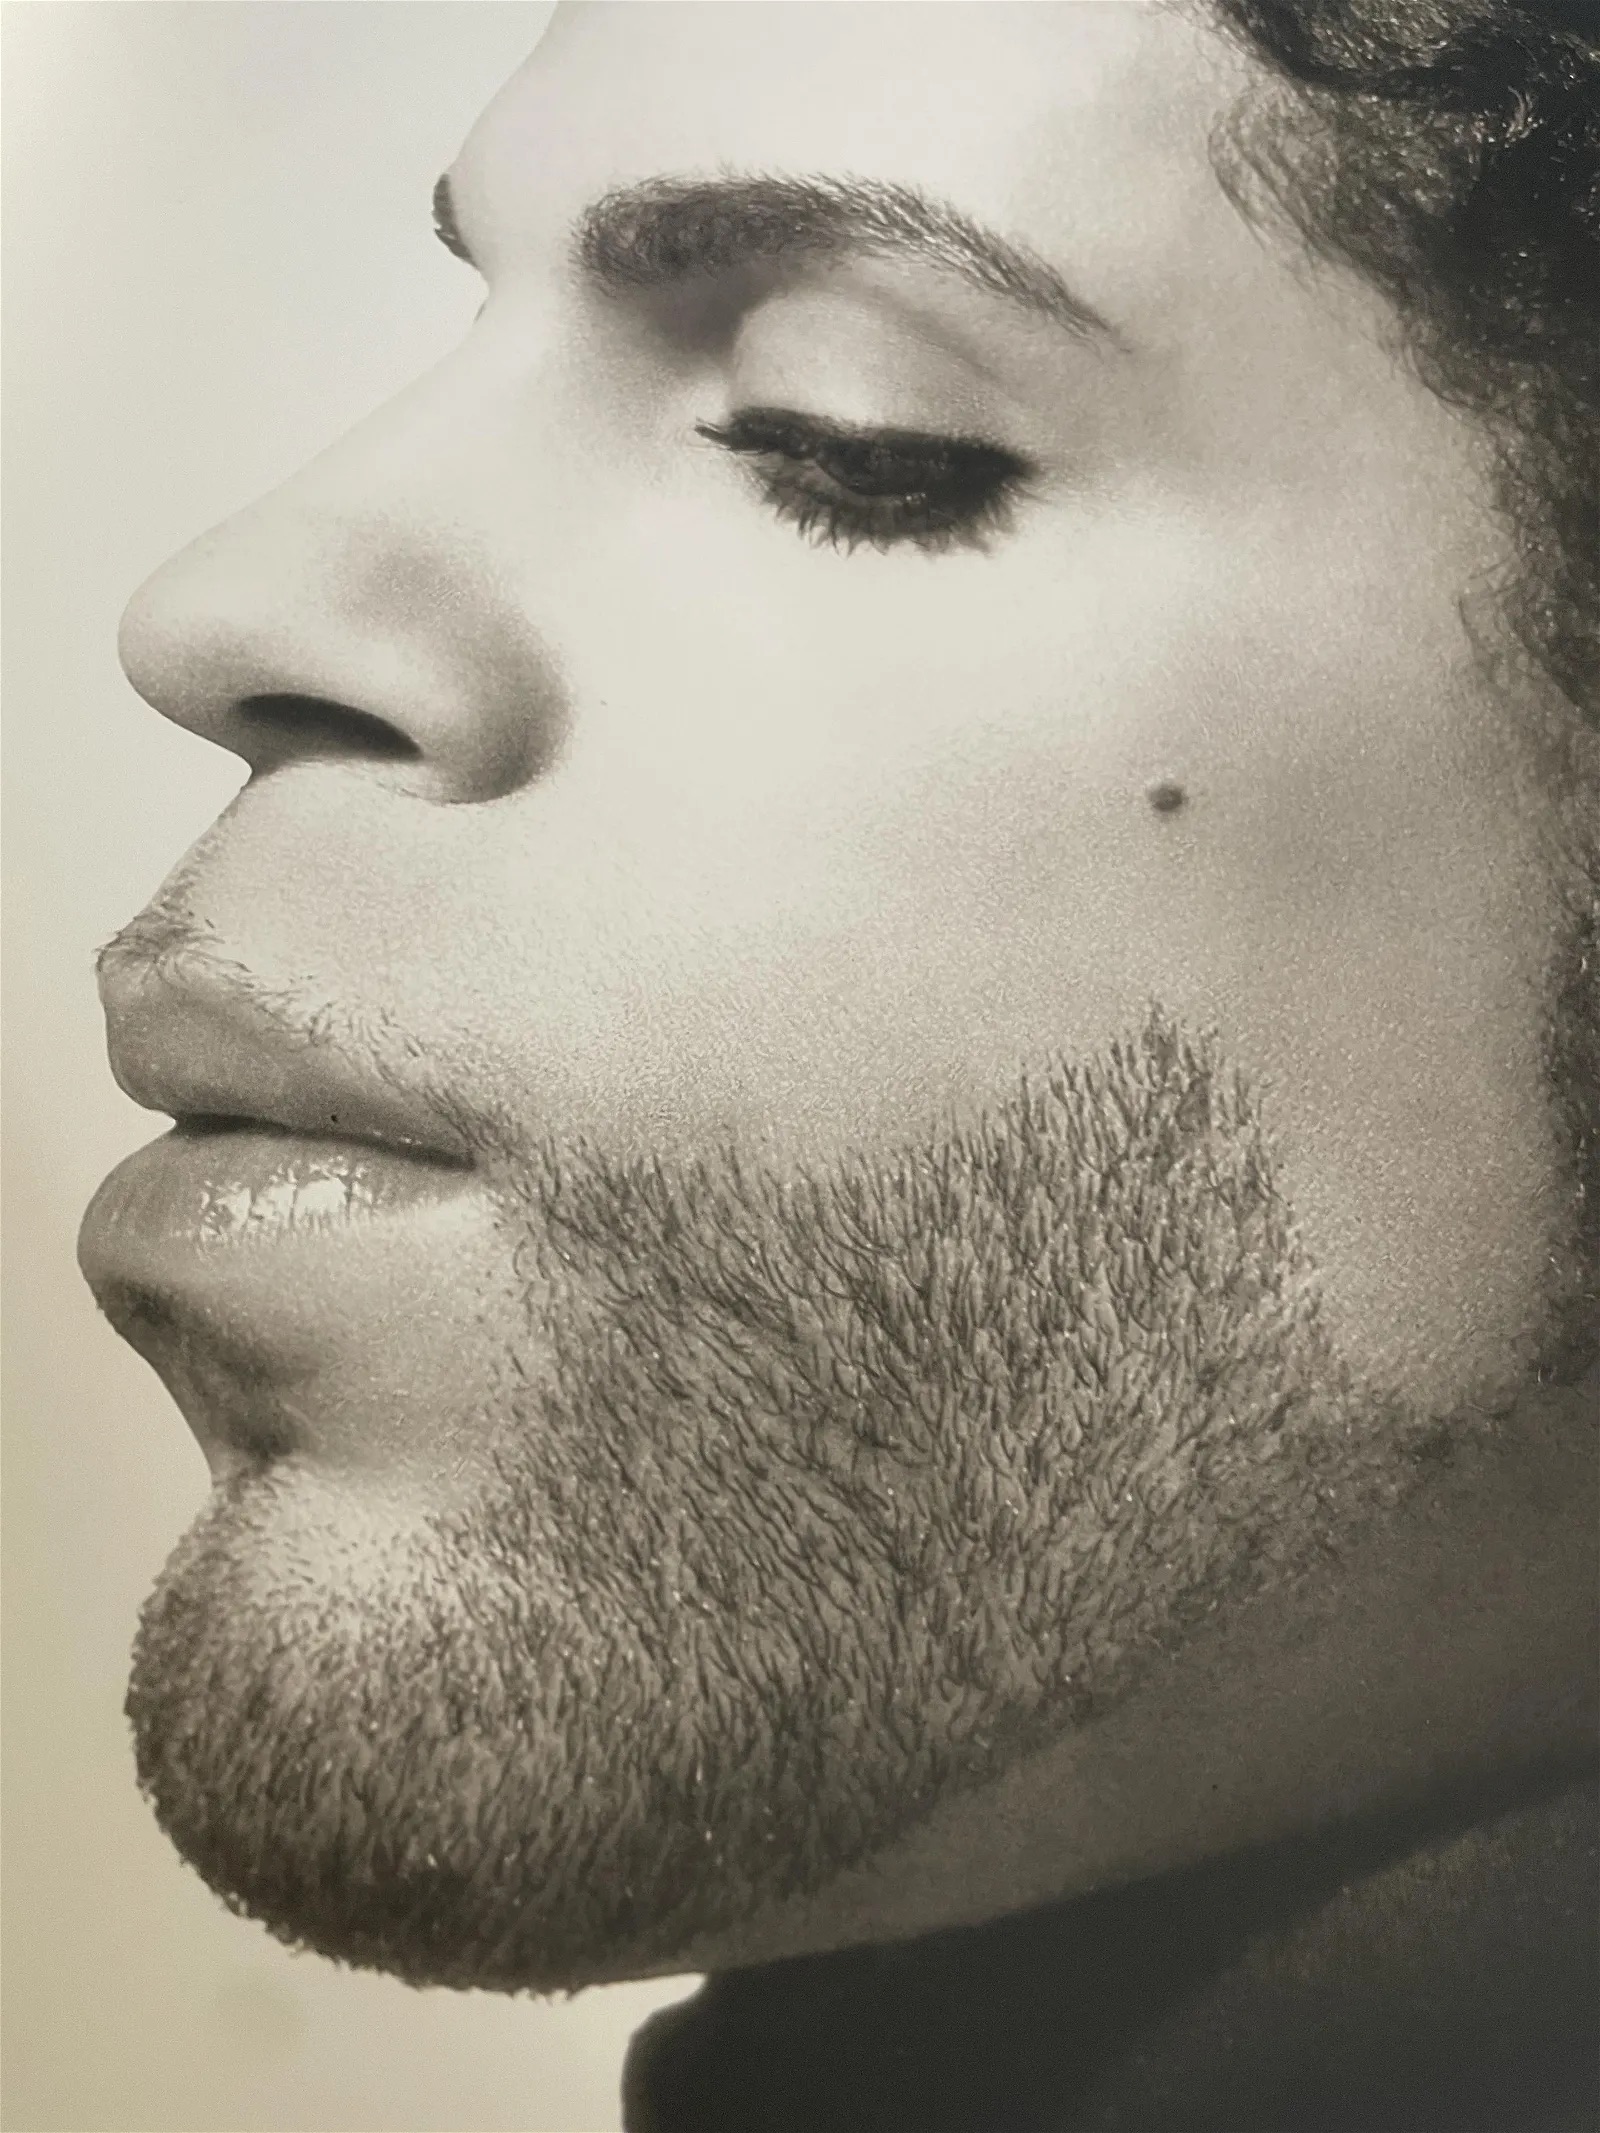 Herb Ritts "Prince, Minneapolis, 1991" Print - Image 6 of 6